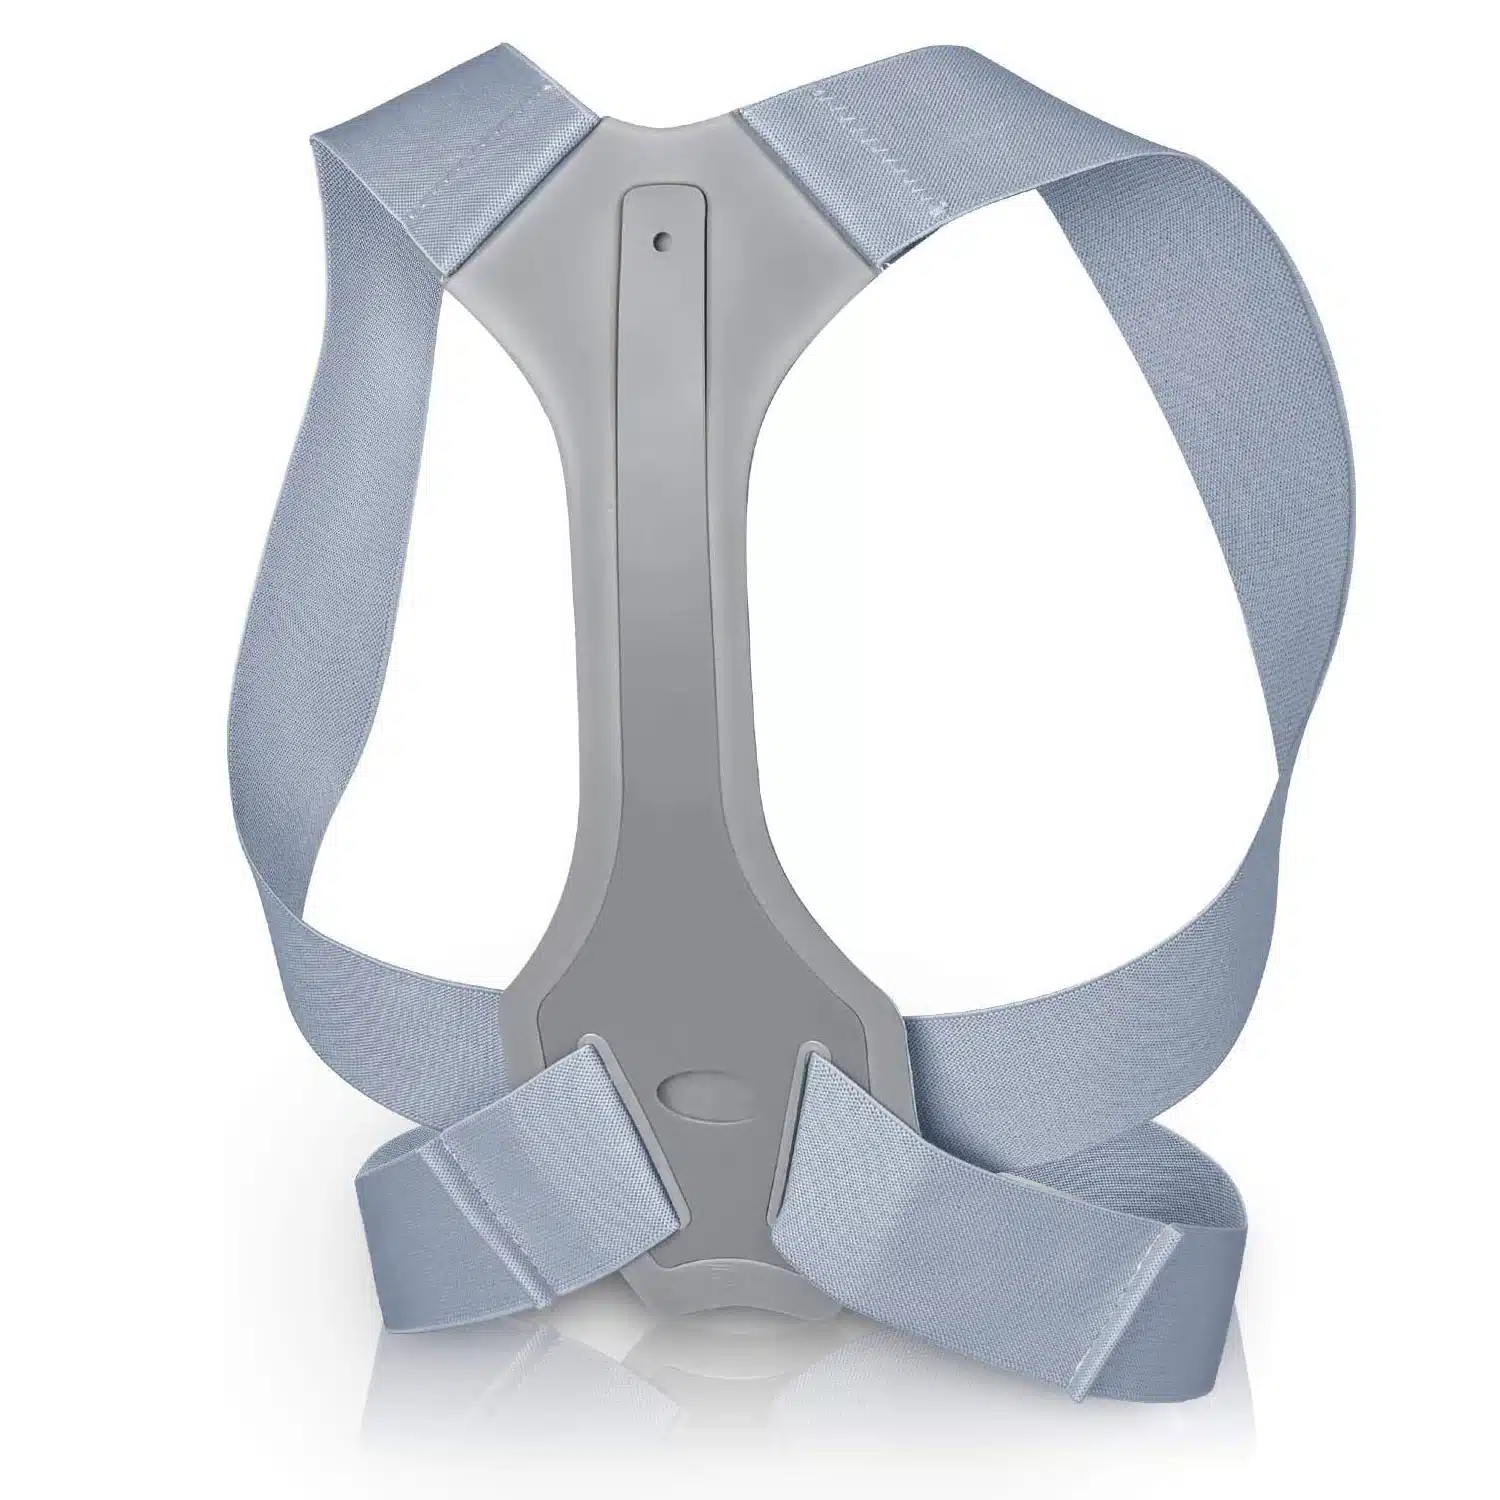 Posture Corrector Adjustable Support Brace aus physio - Support